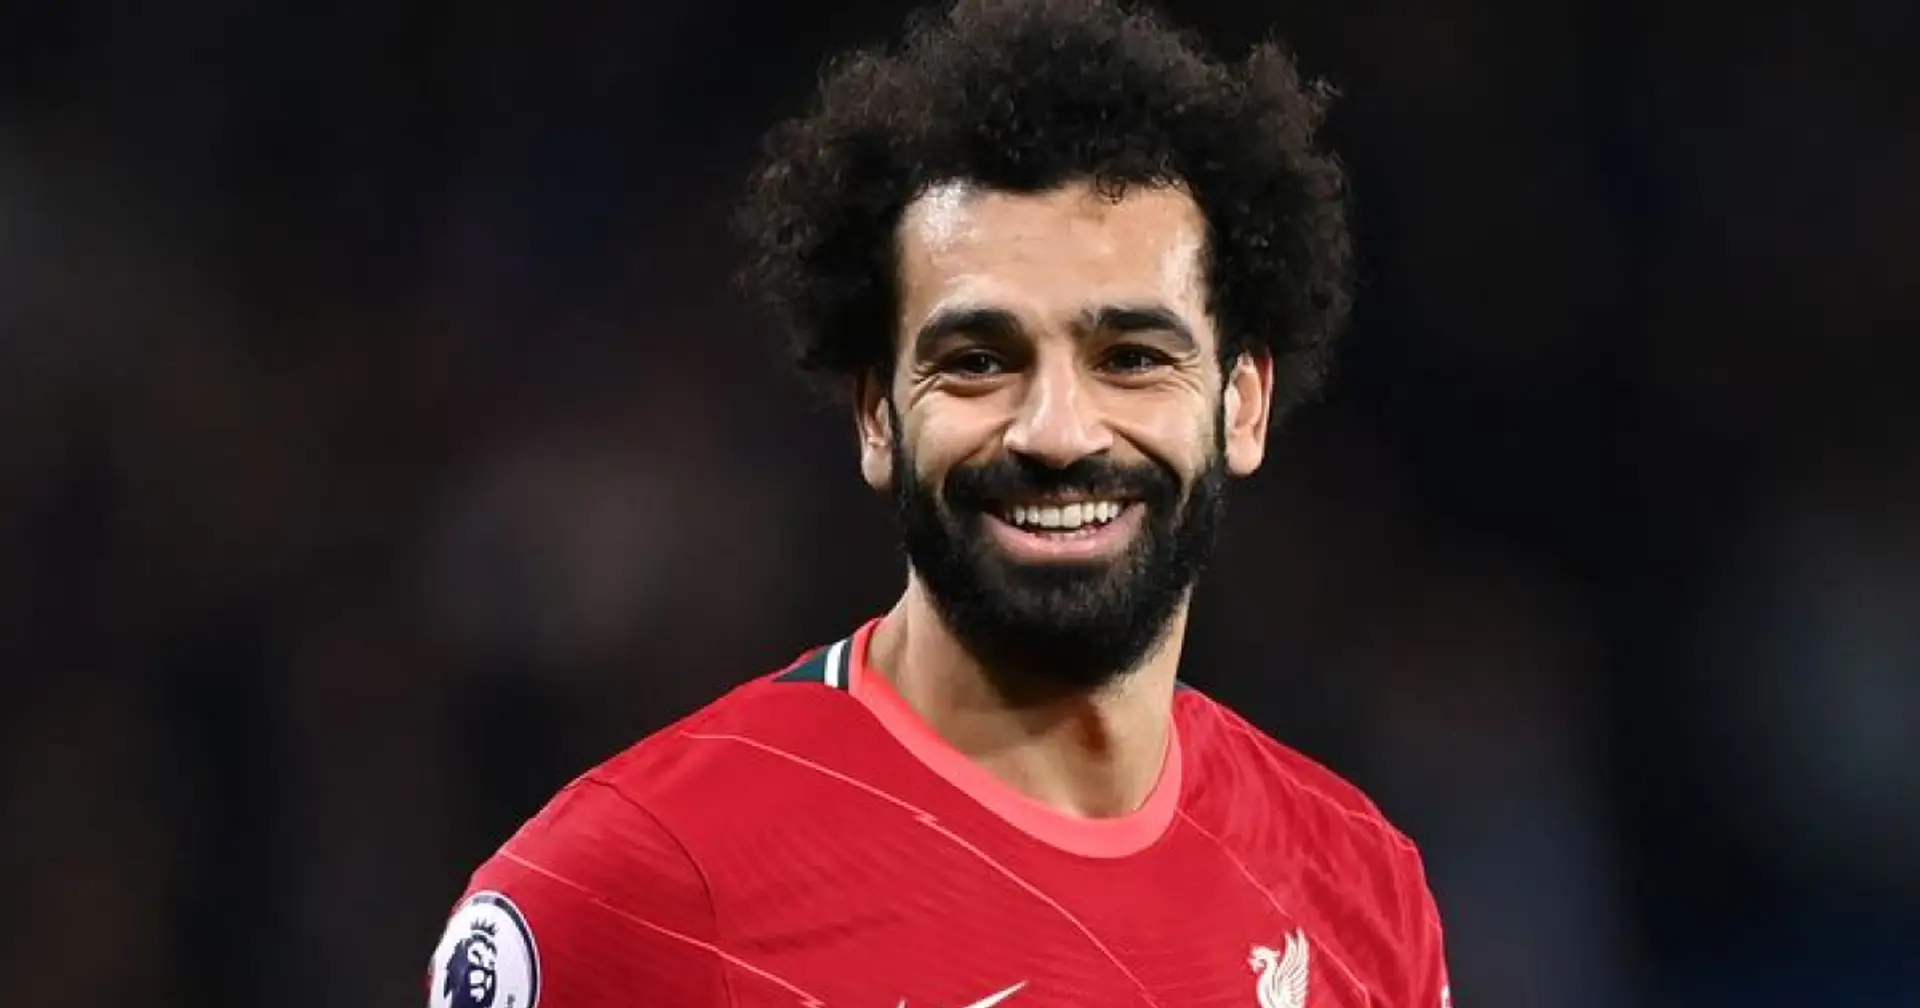 Salah hits 200 goal involvements — only one player took fewer games to reach it